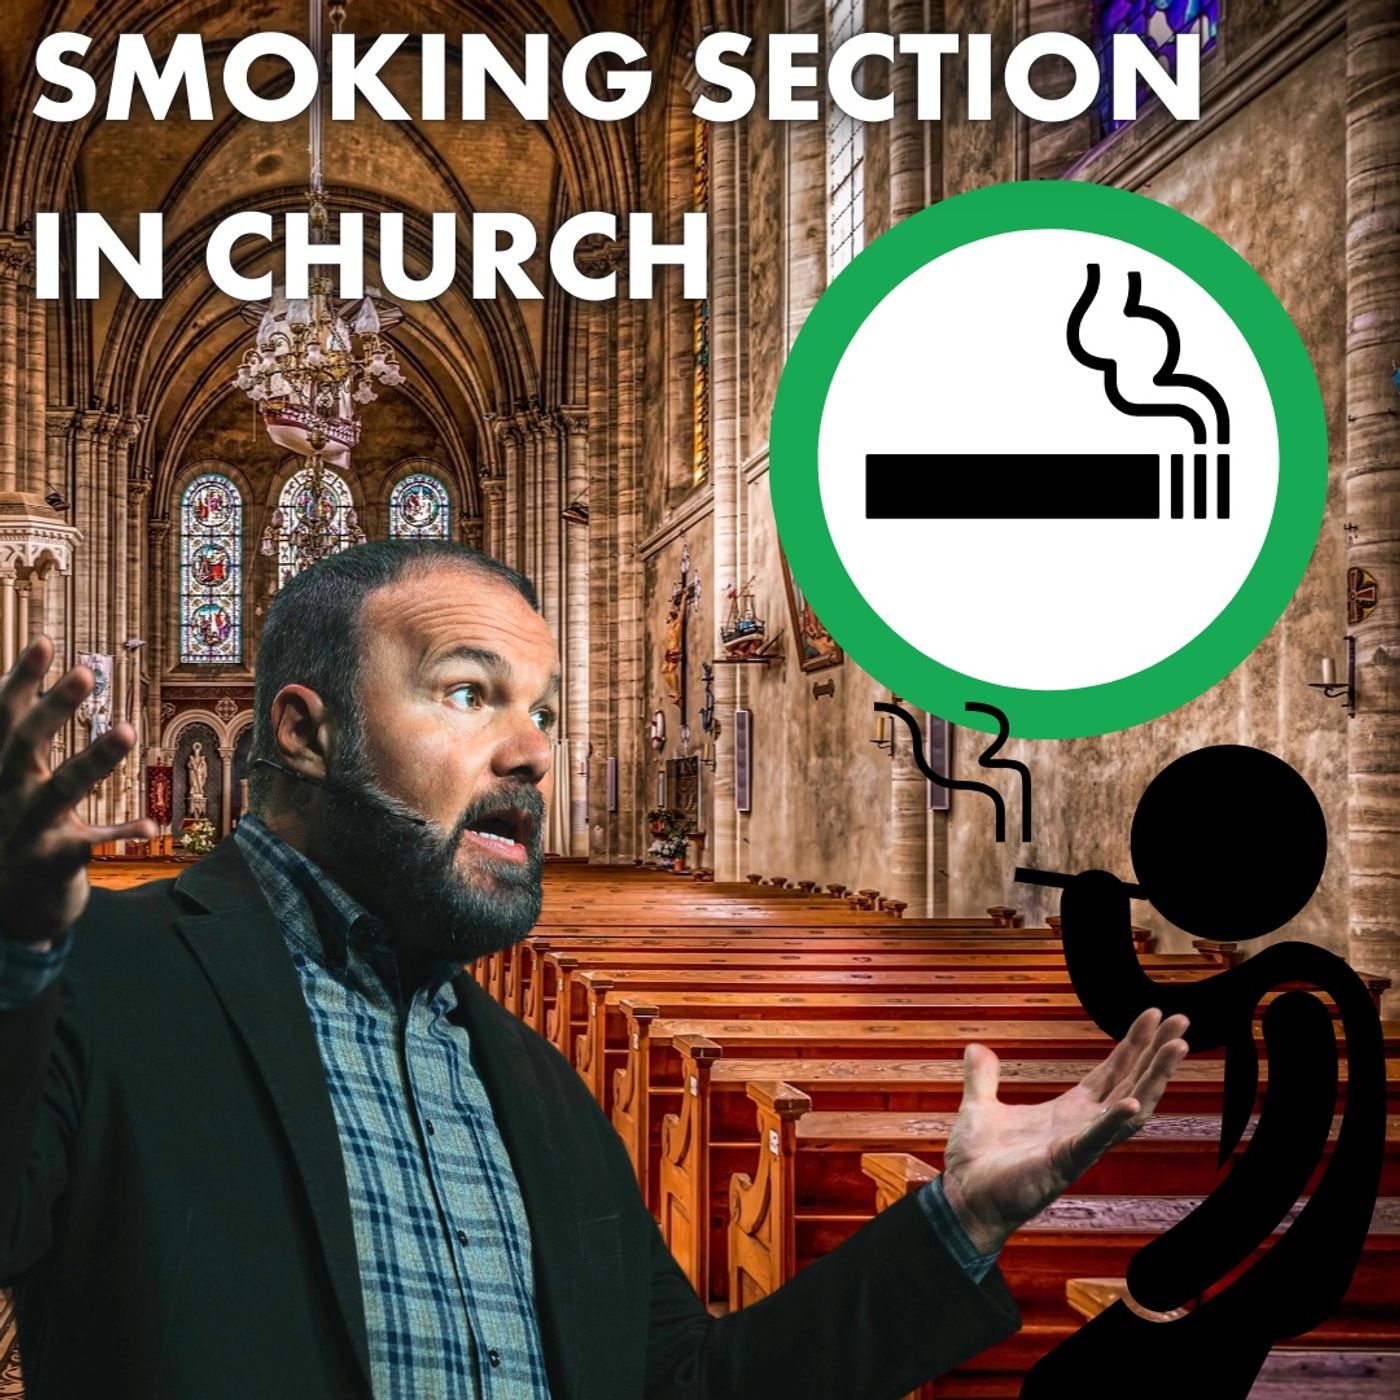 I Started a Smoking Section at Church